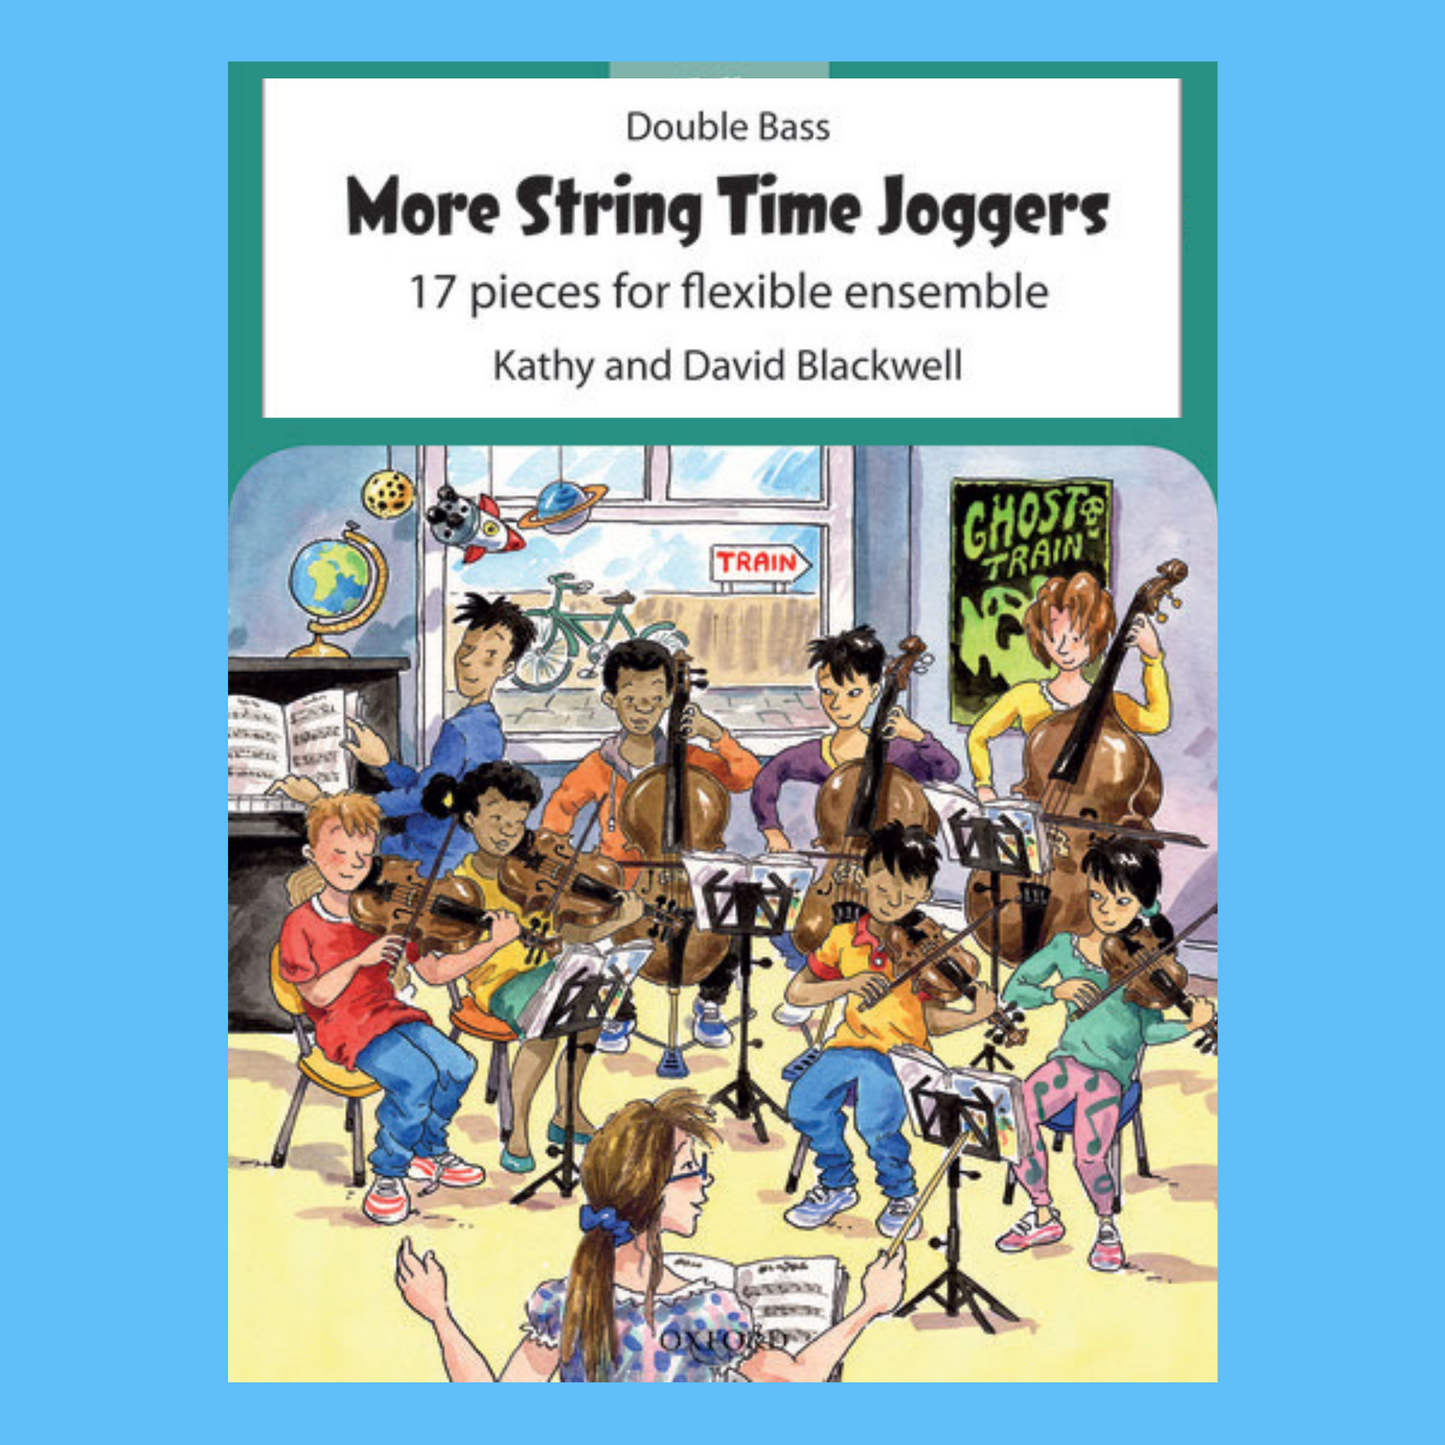 More String Time Joggers - Double Bass Book (Ensemble Series)